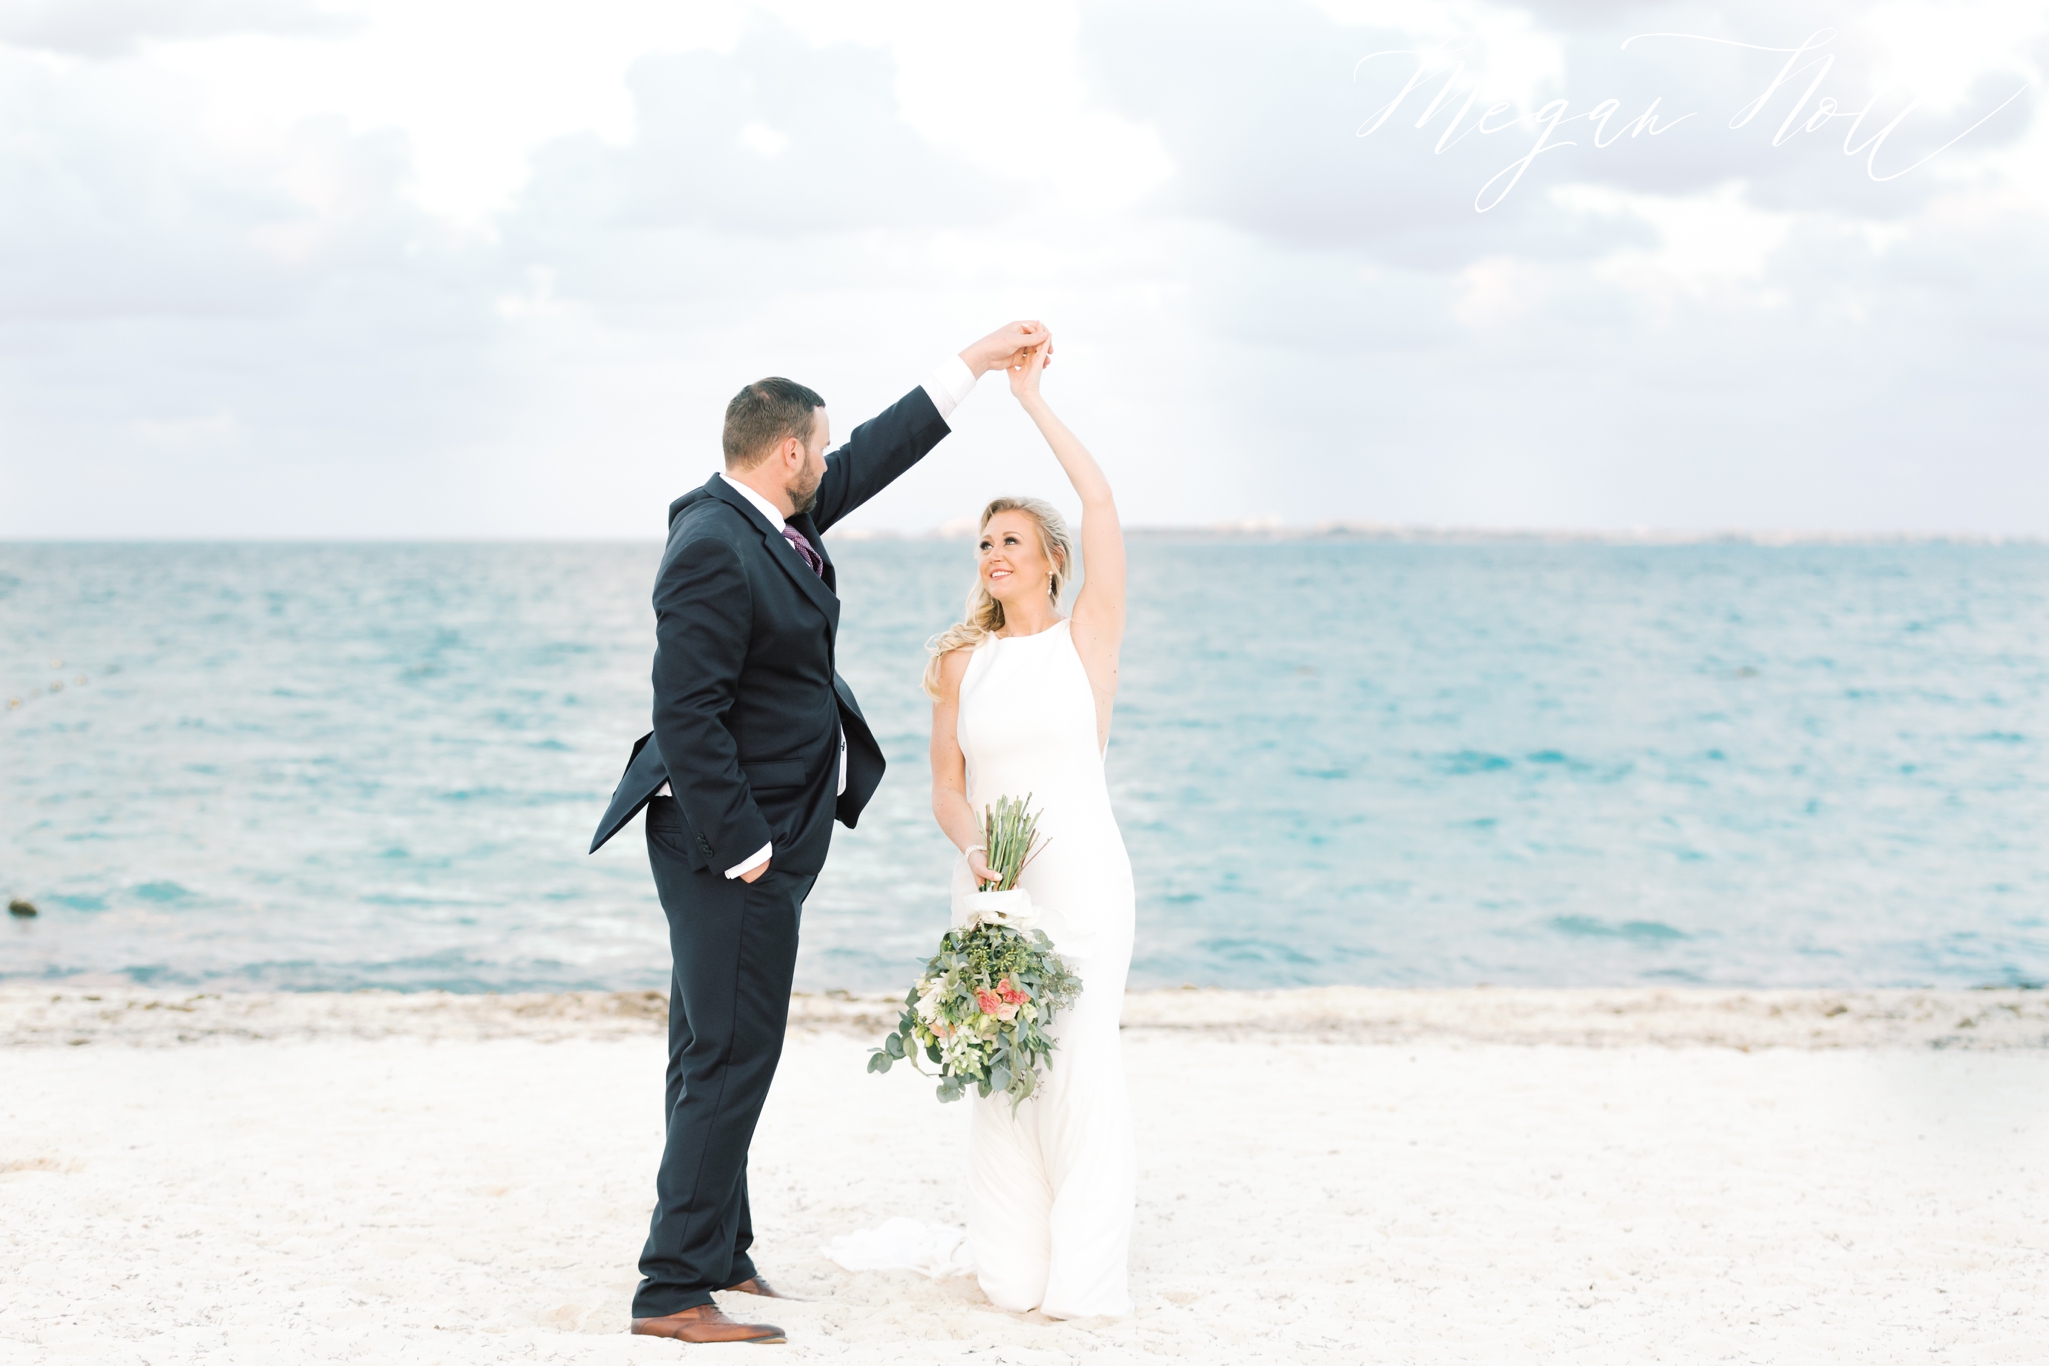 Portraits at the beach of Bride and Groom at sunset in Cancun Wedding